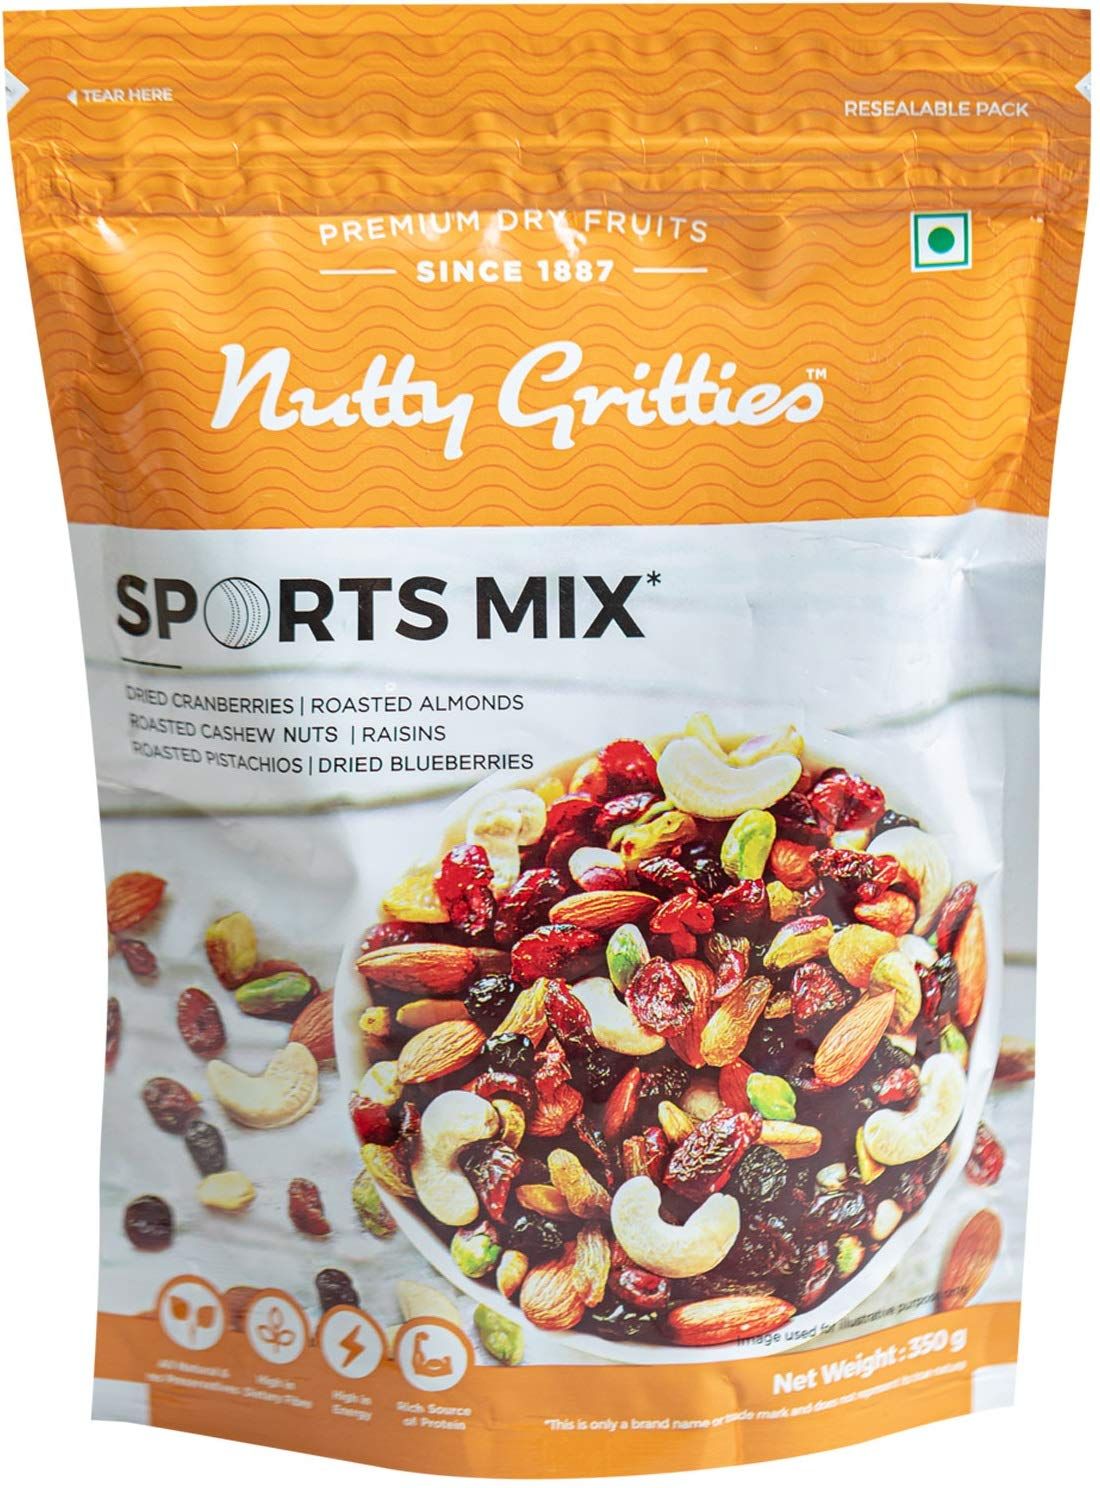 Nutty Gritties Sports Mix Image